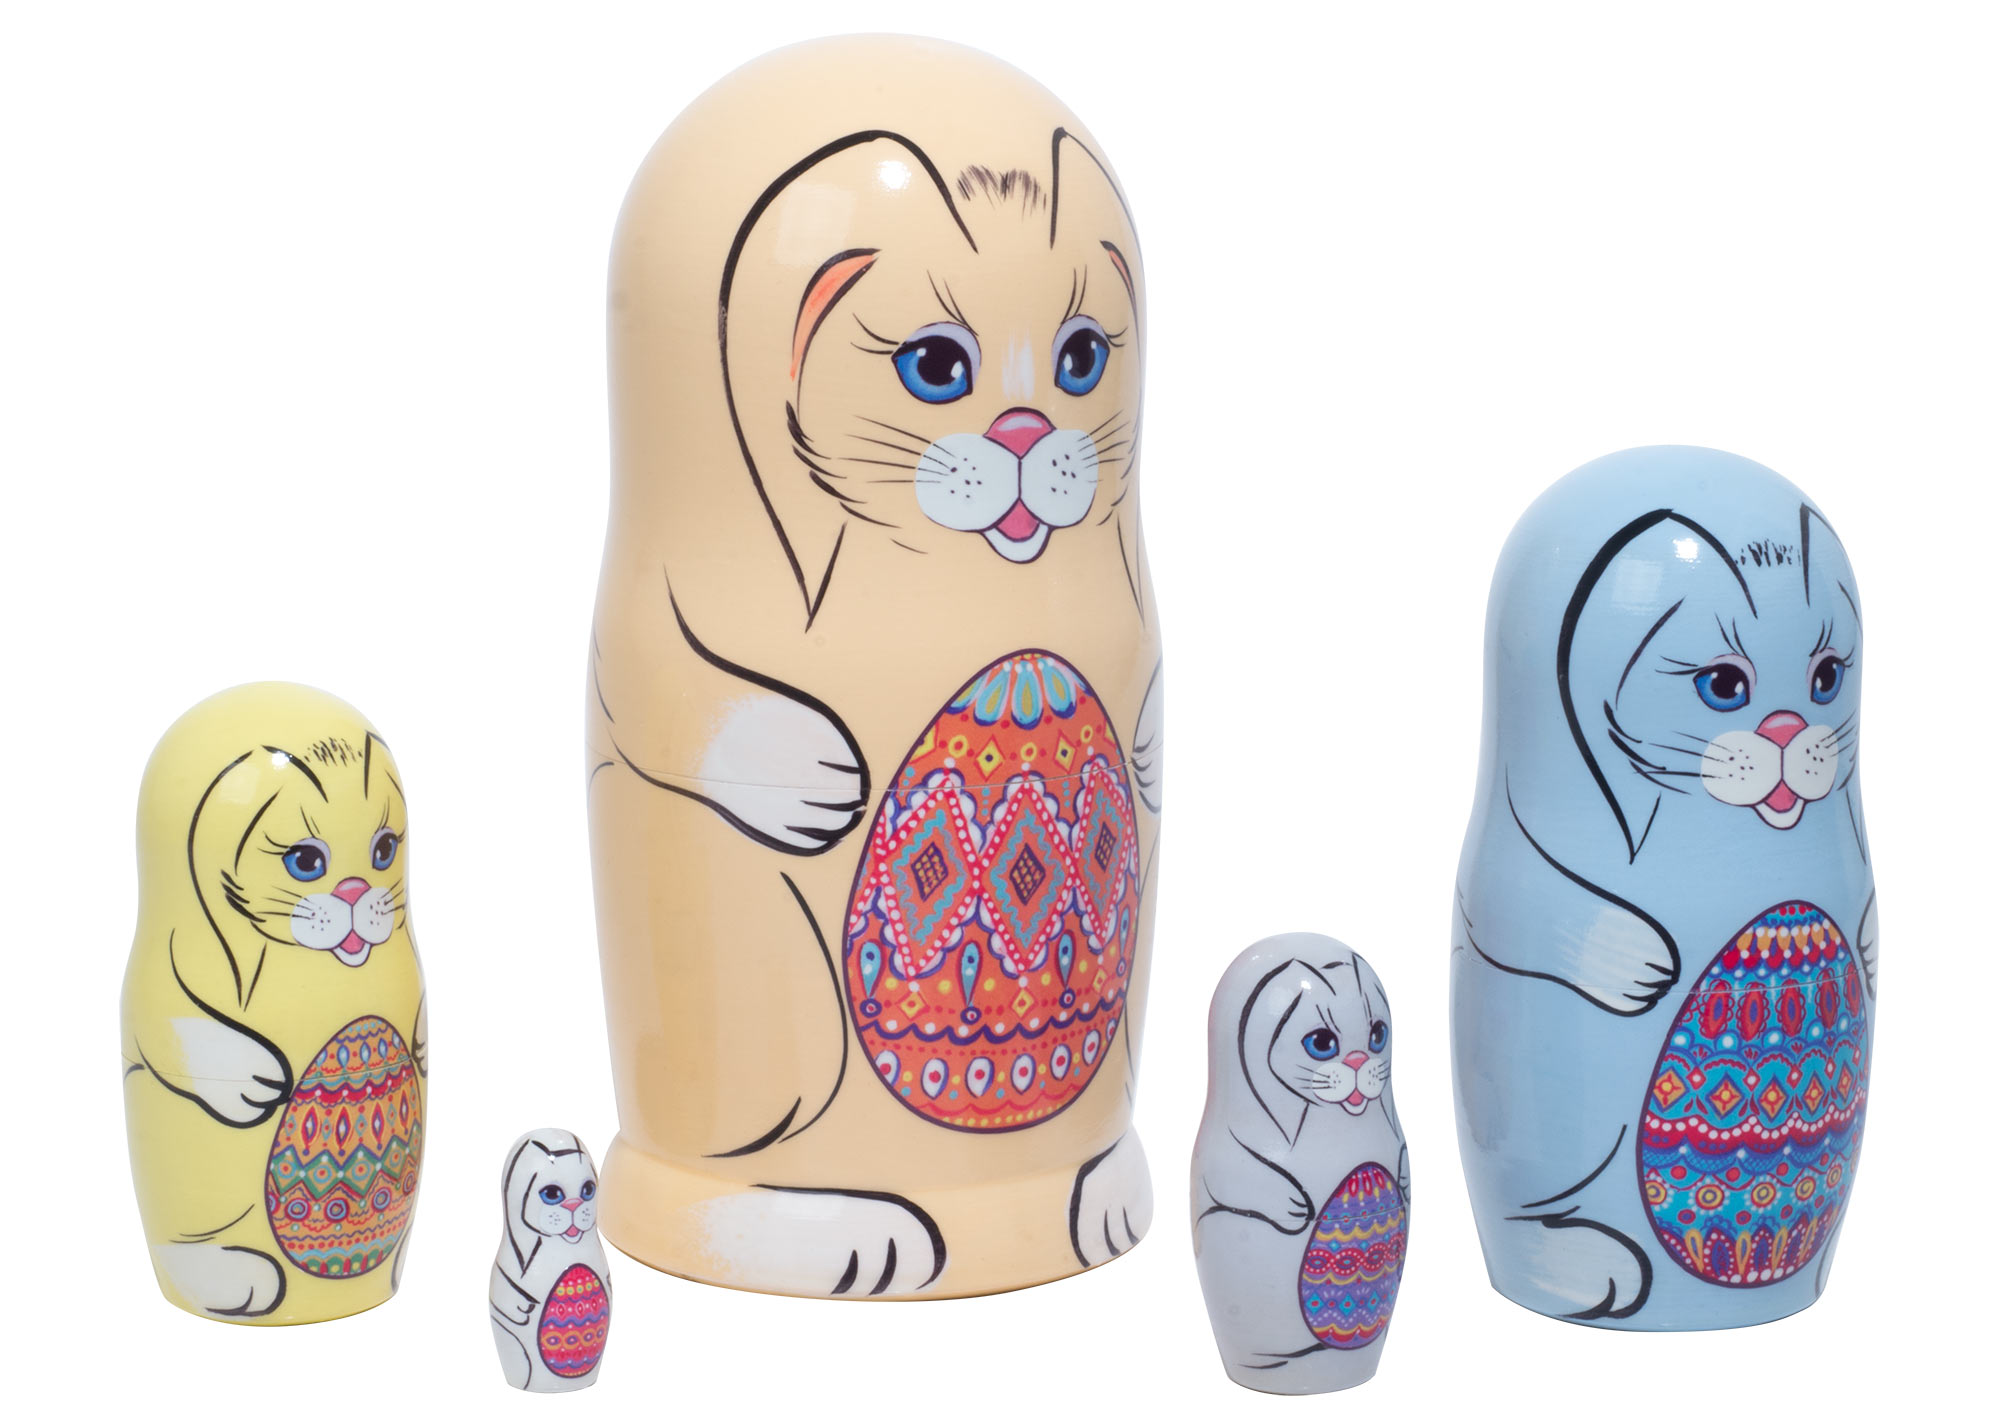 Buy Easter Bunnies with Eggs Nesting Doll 5pc./5" at GoldenCockerel.com